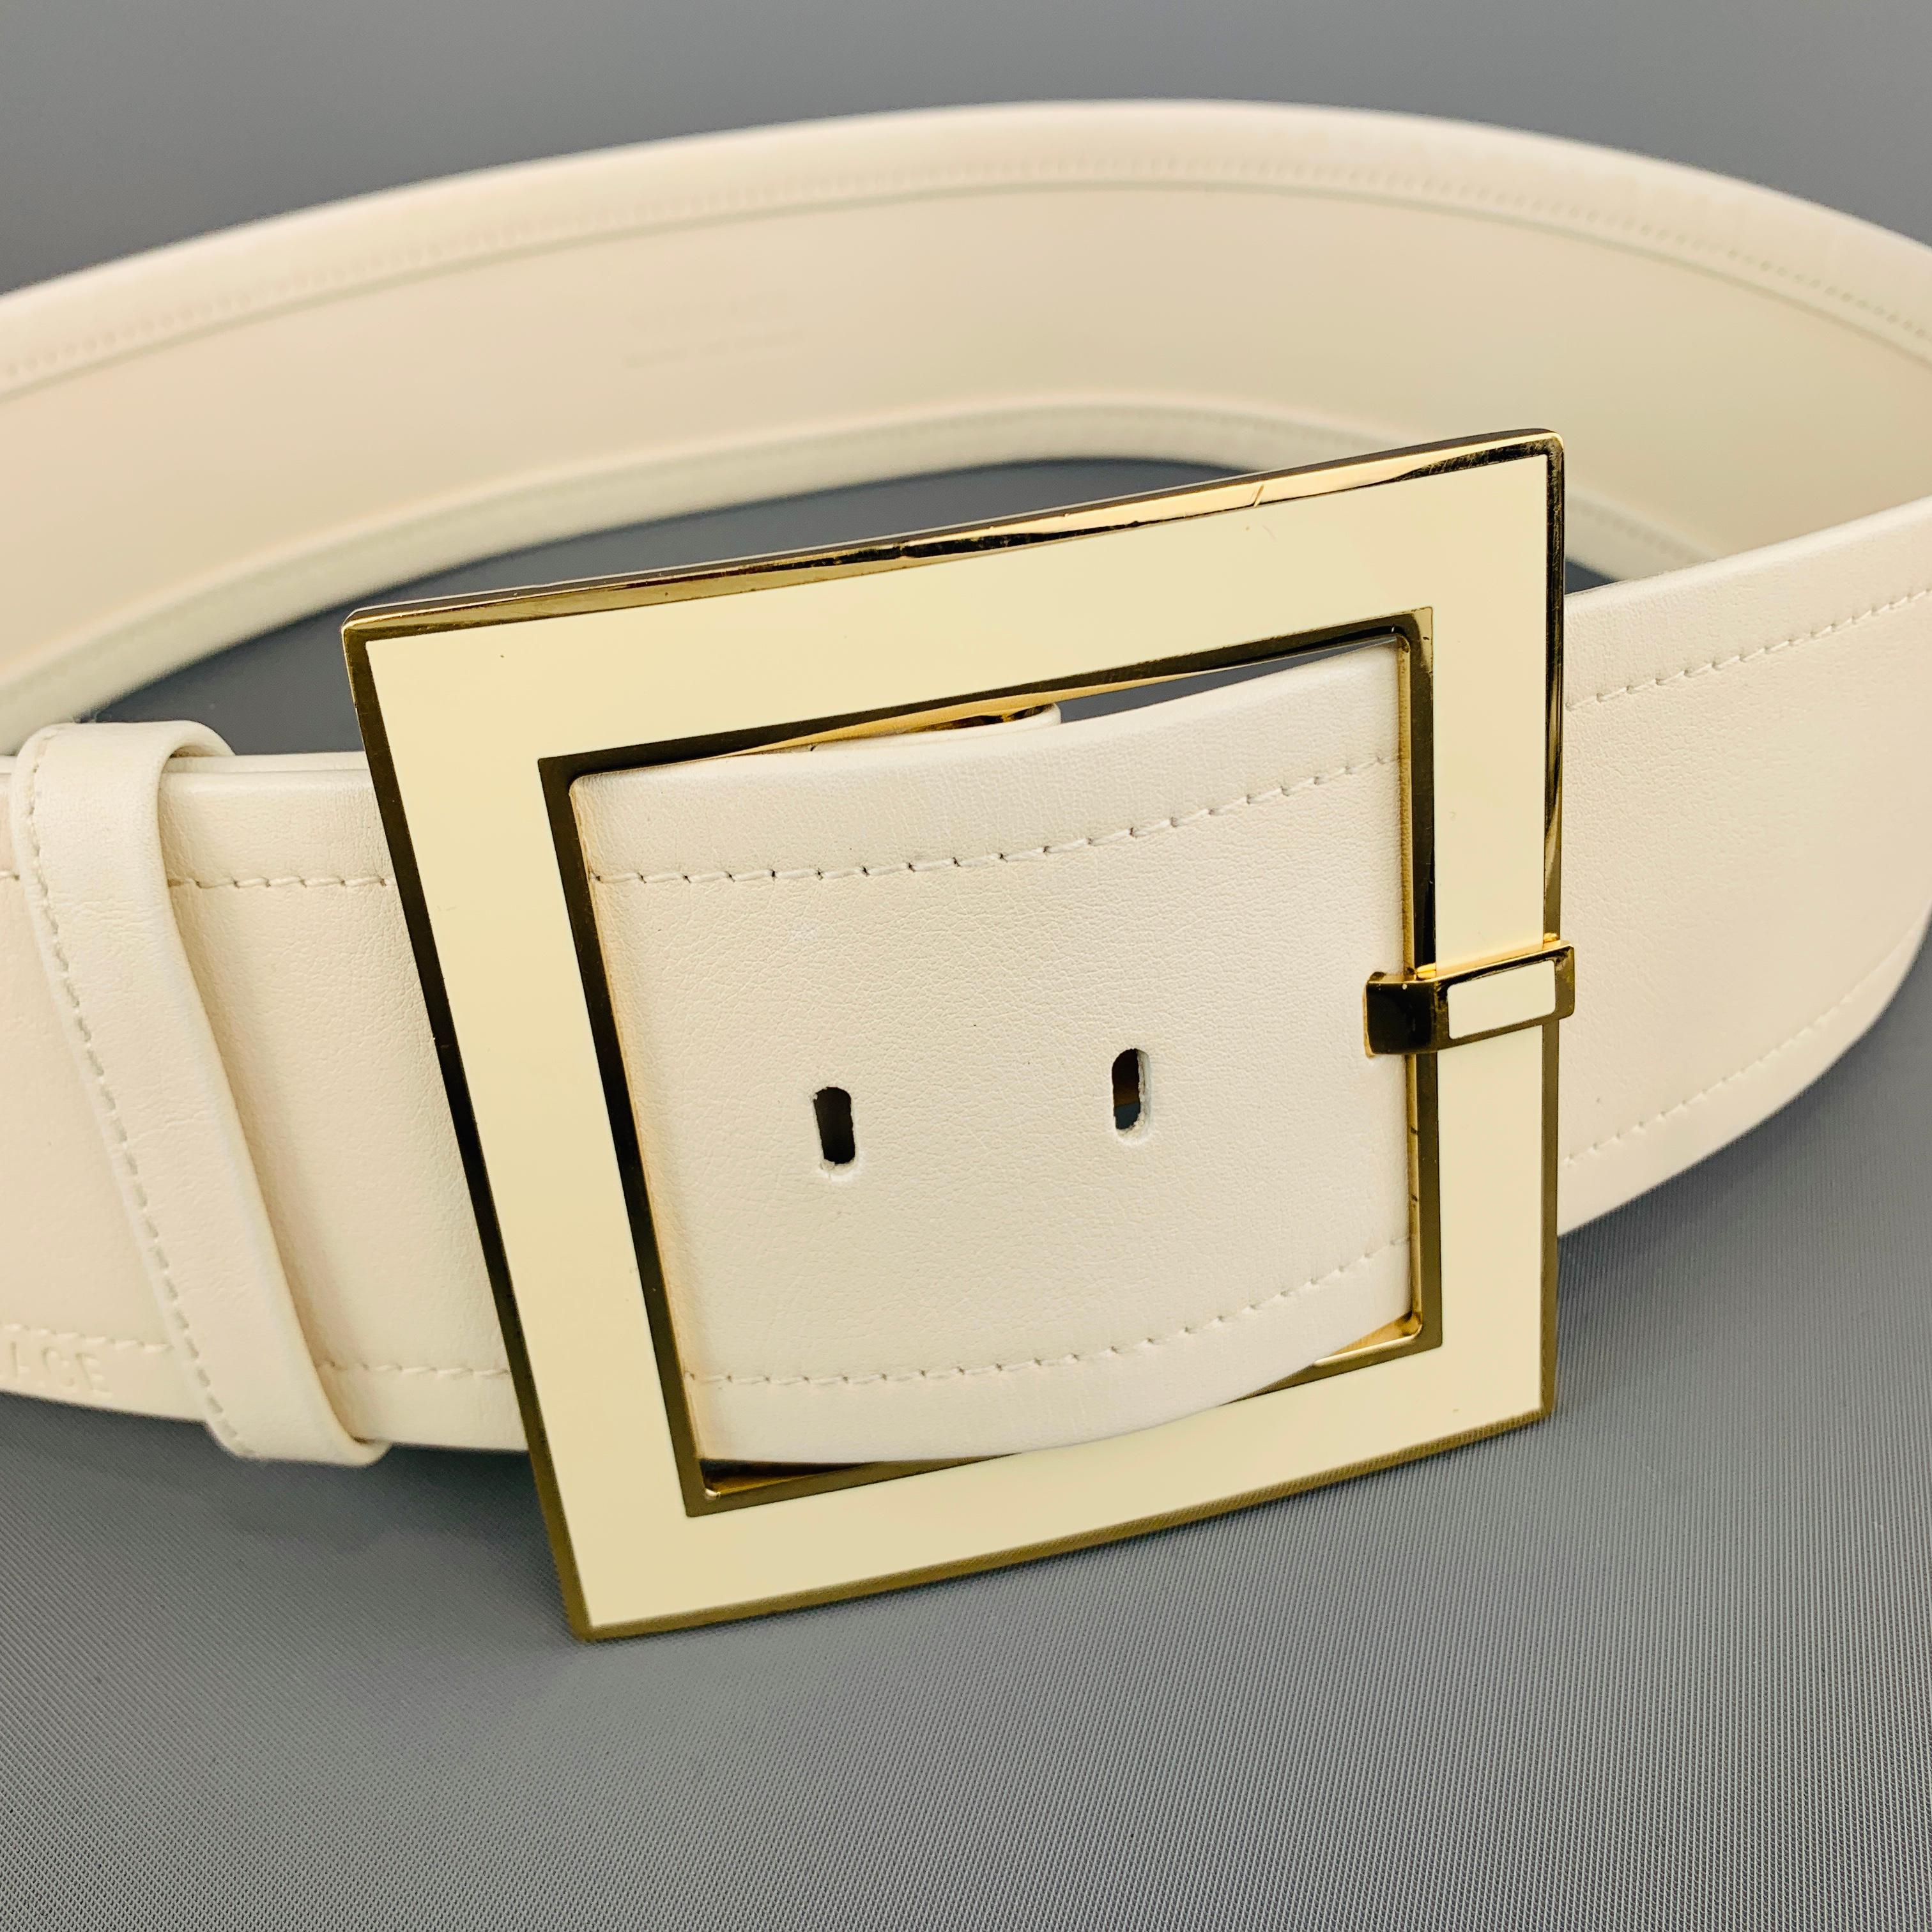 VERSACE waist belt features a thick cream leather strap and oversized gold tone metal and enamel square buckle. Made in Italy.
 
Very Good Pre-Owned Condition.
Marked: 85/34
 
Length: 40 in.
Width: 2.5 in.
Fits: 33-35.5 in.
Buckle: 3.75 x 3.75 in.